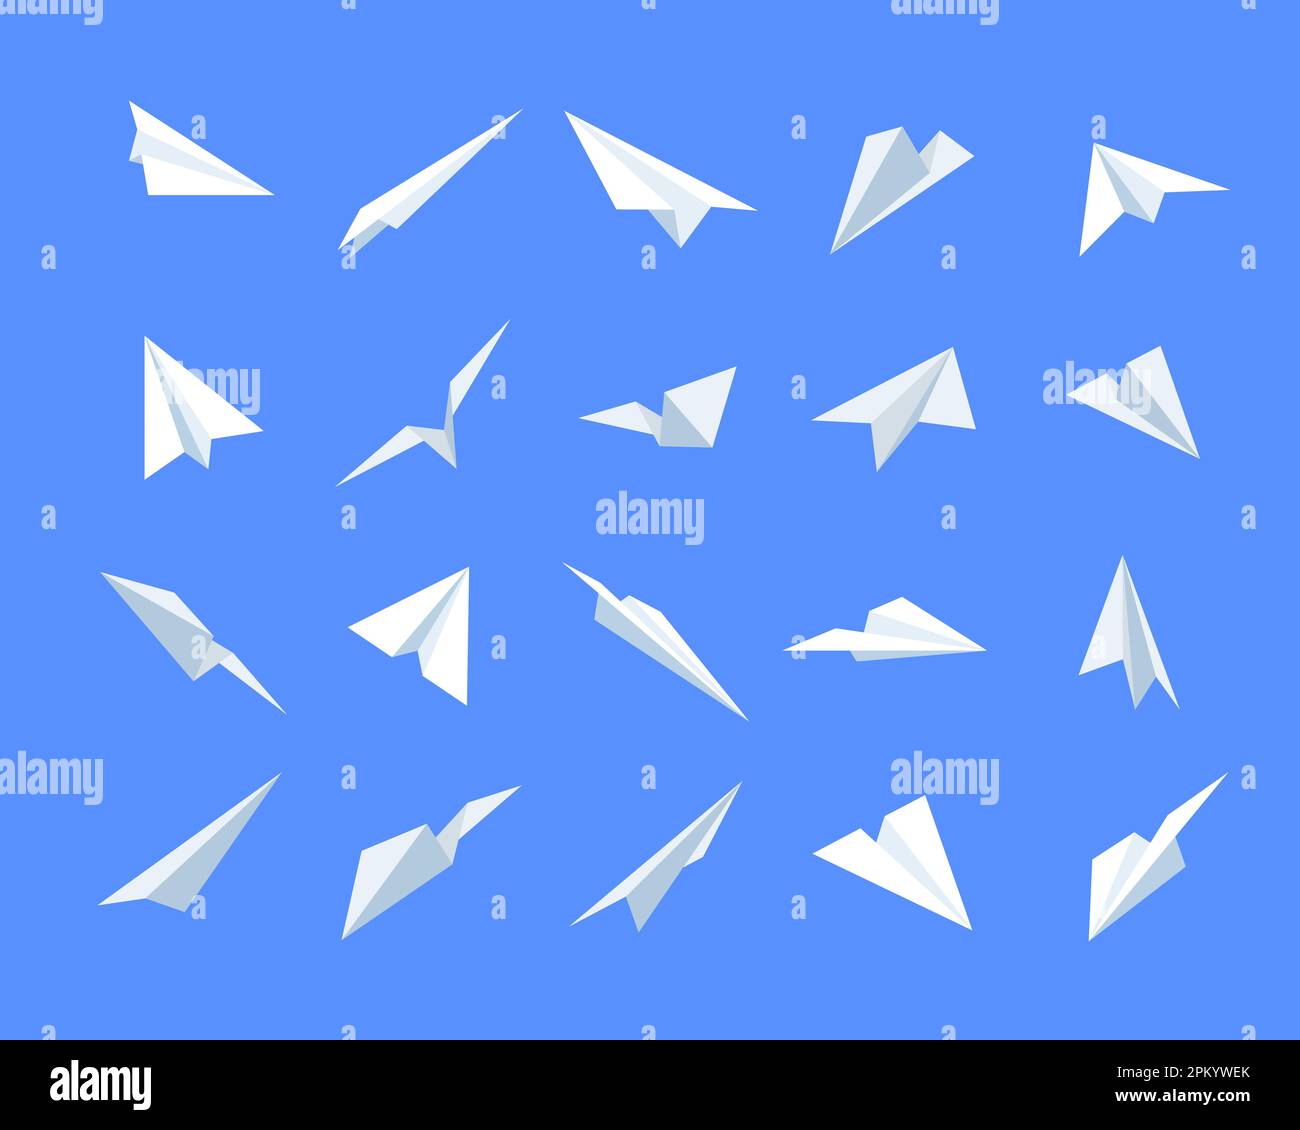 flying-paper-airplanes-in-blue-sky-cartoon-vector-illustration-stock